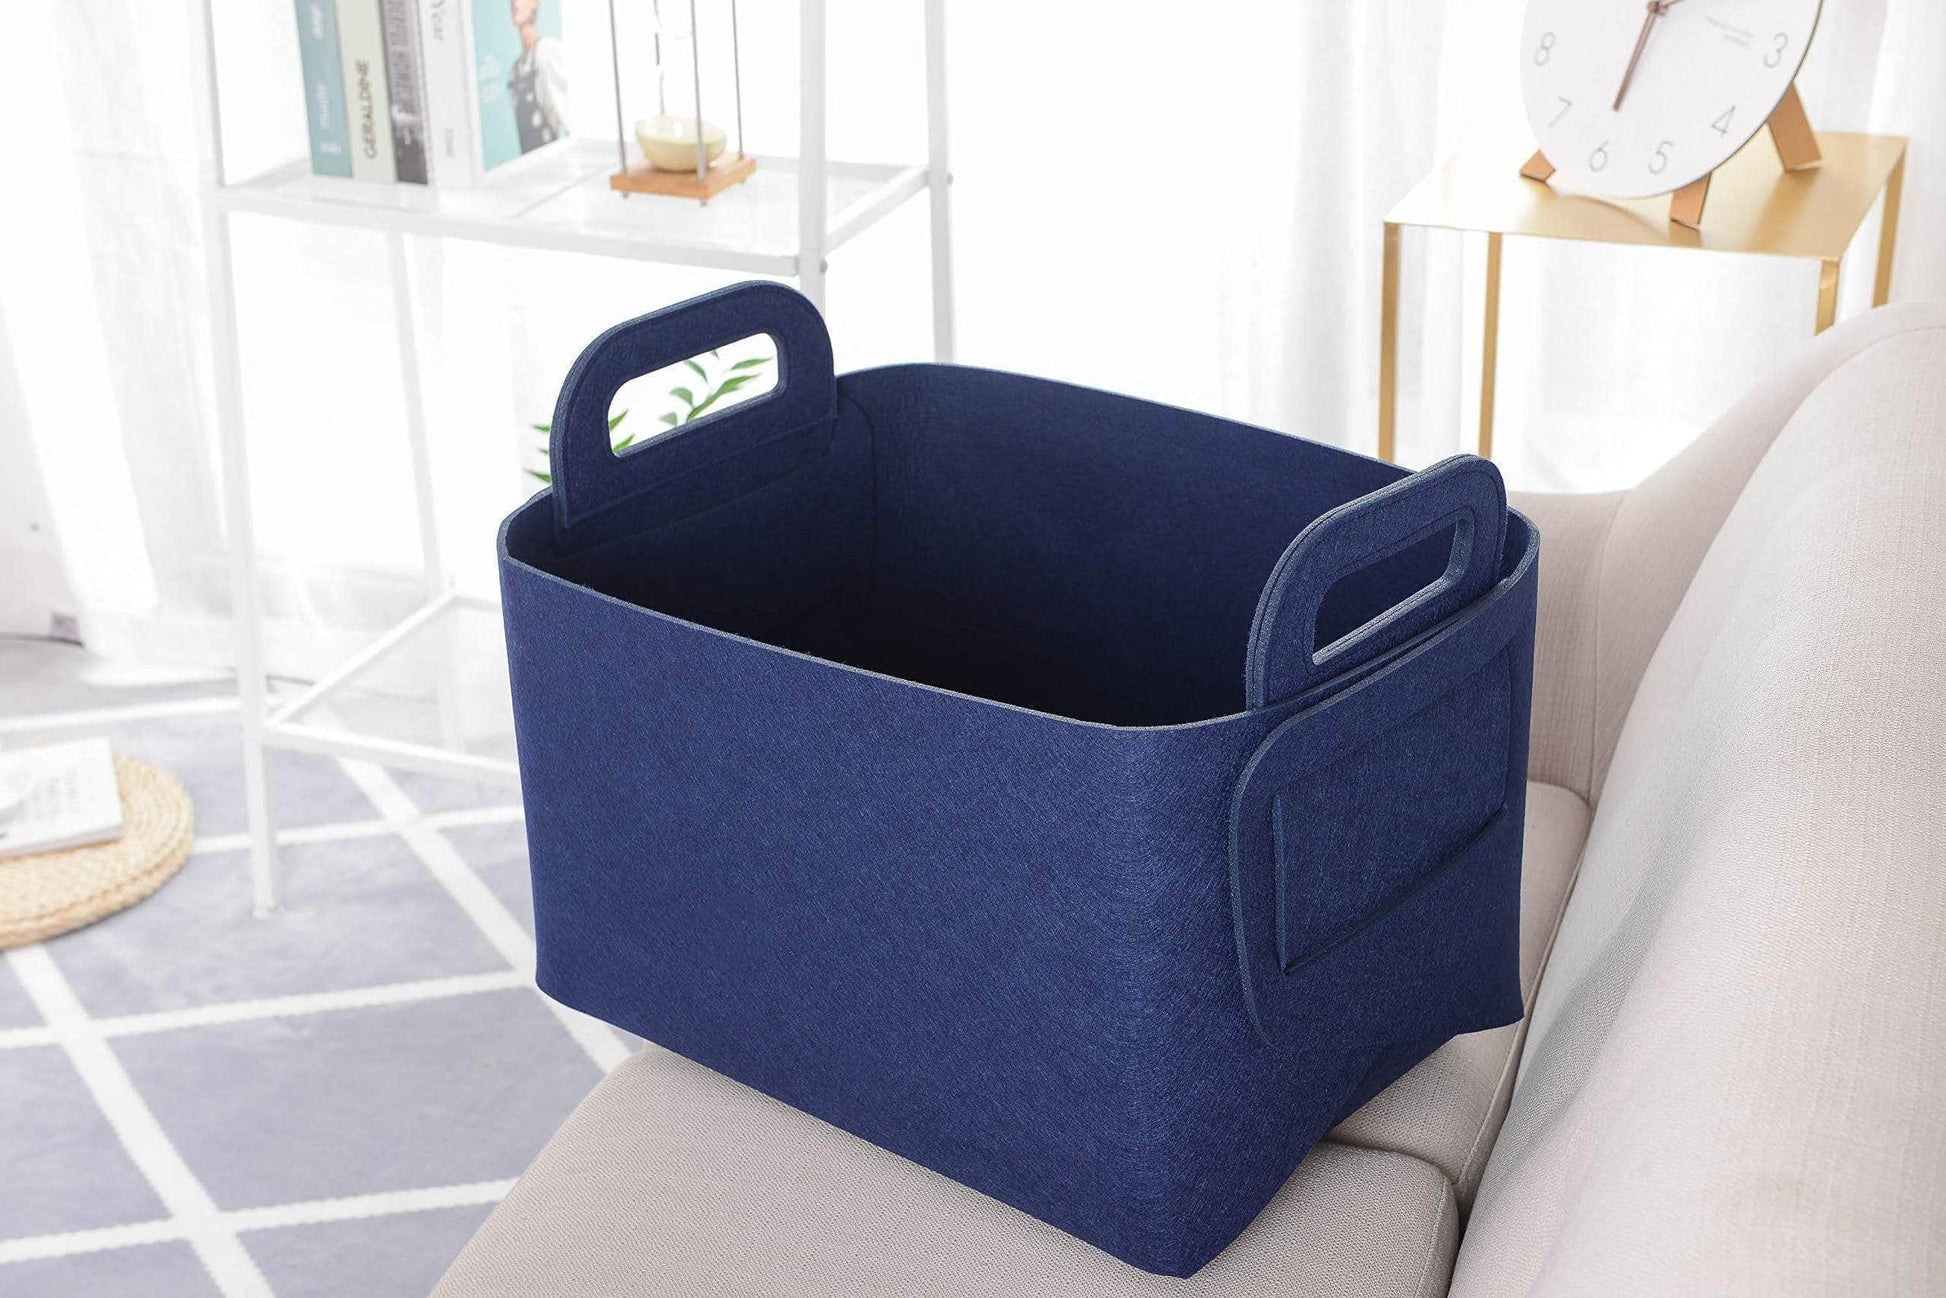 Related storage basket felt storage bin collapsible convenient box organizer with carry handles for office bedroom closet babies nursery toys dvd laundry organizing